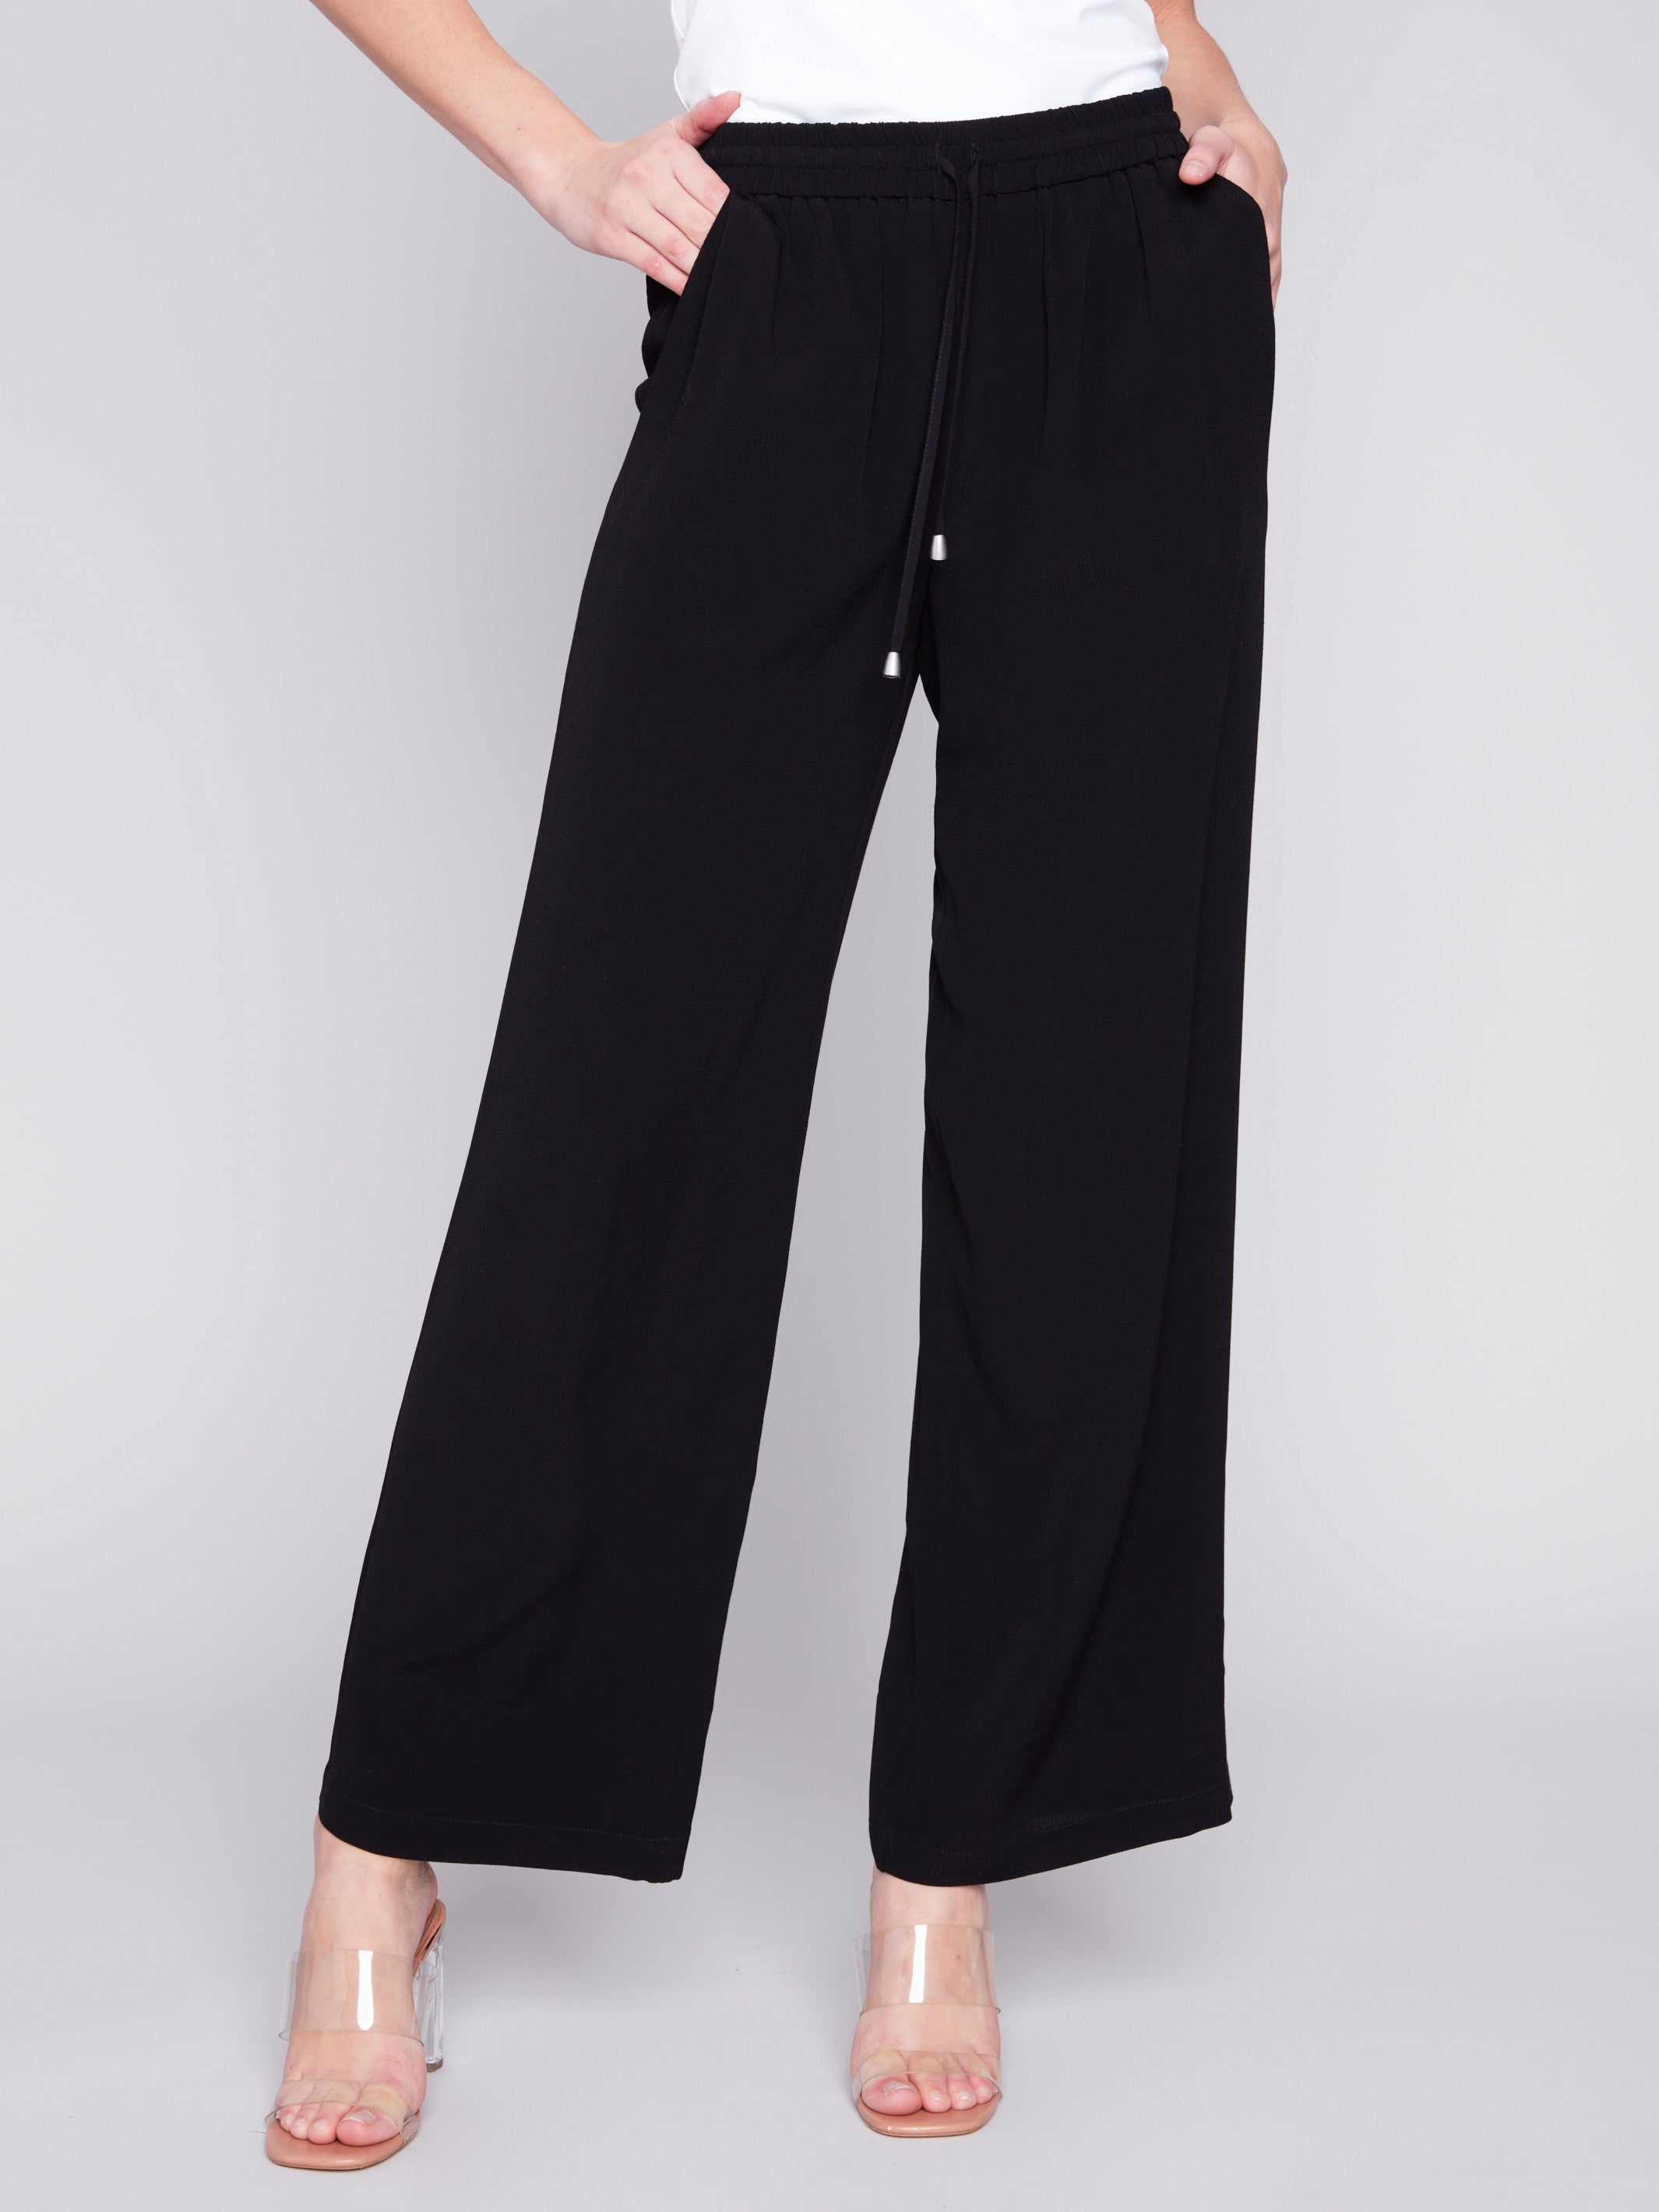 Wide Leg Pants with Drawstring - Black - Charlie B Collection Canada - Image 2